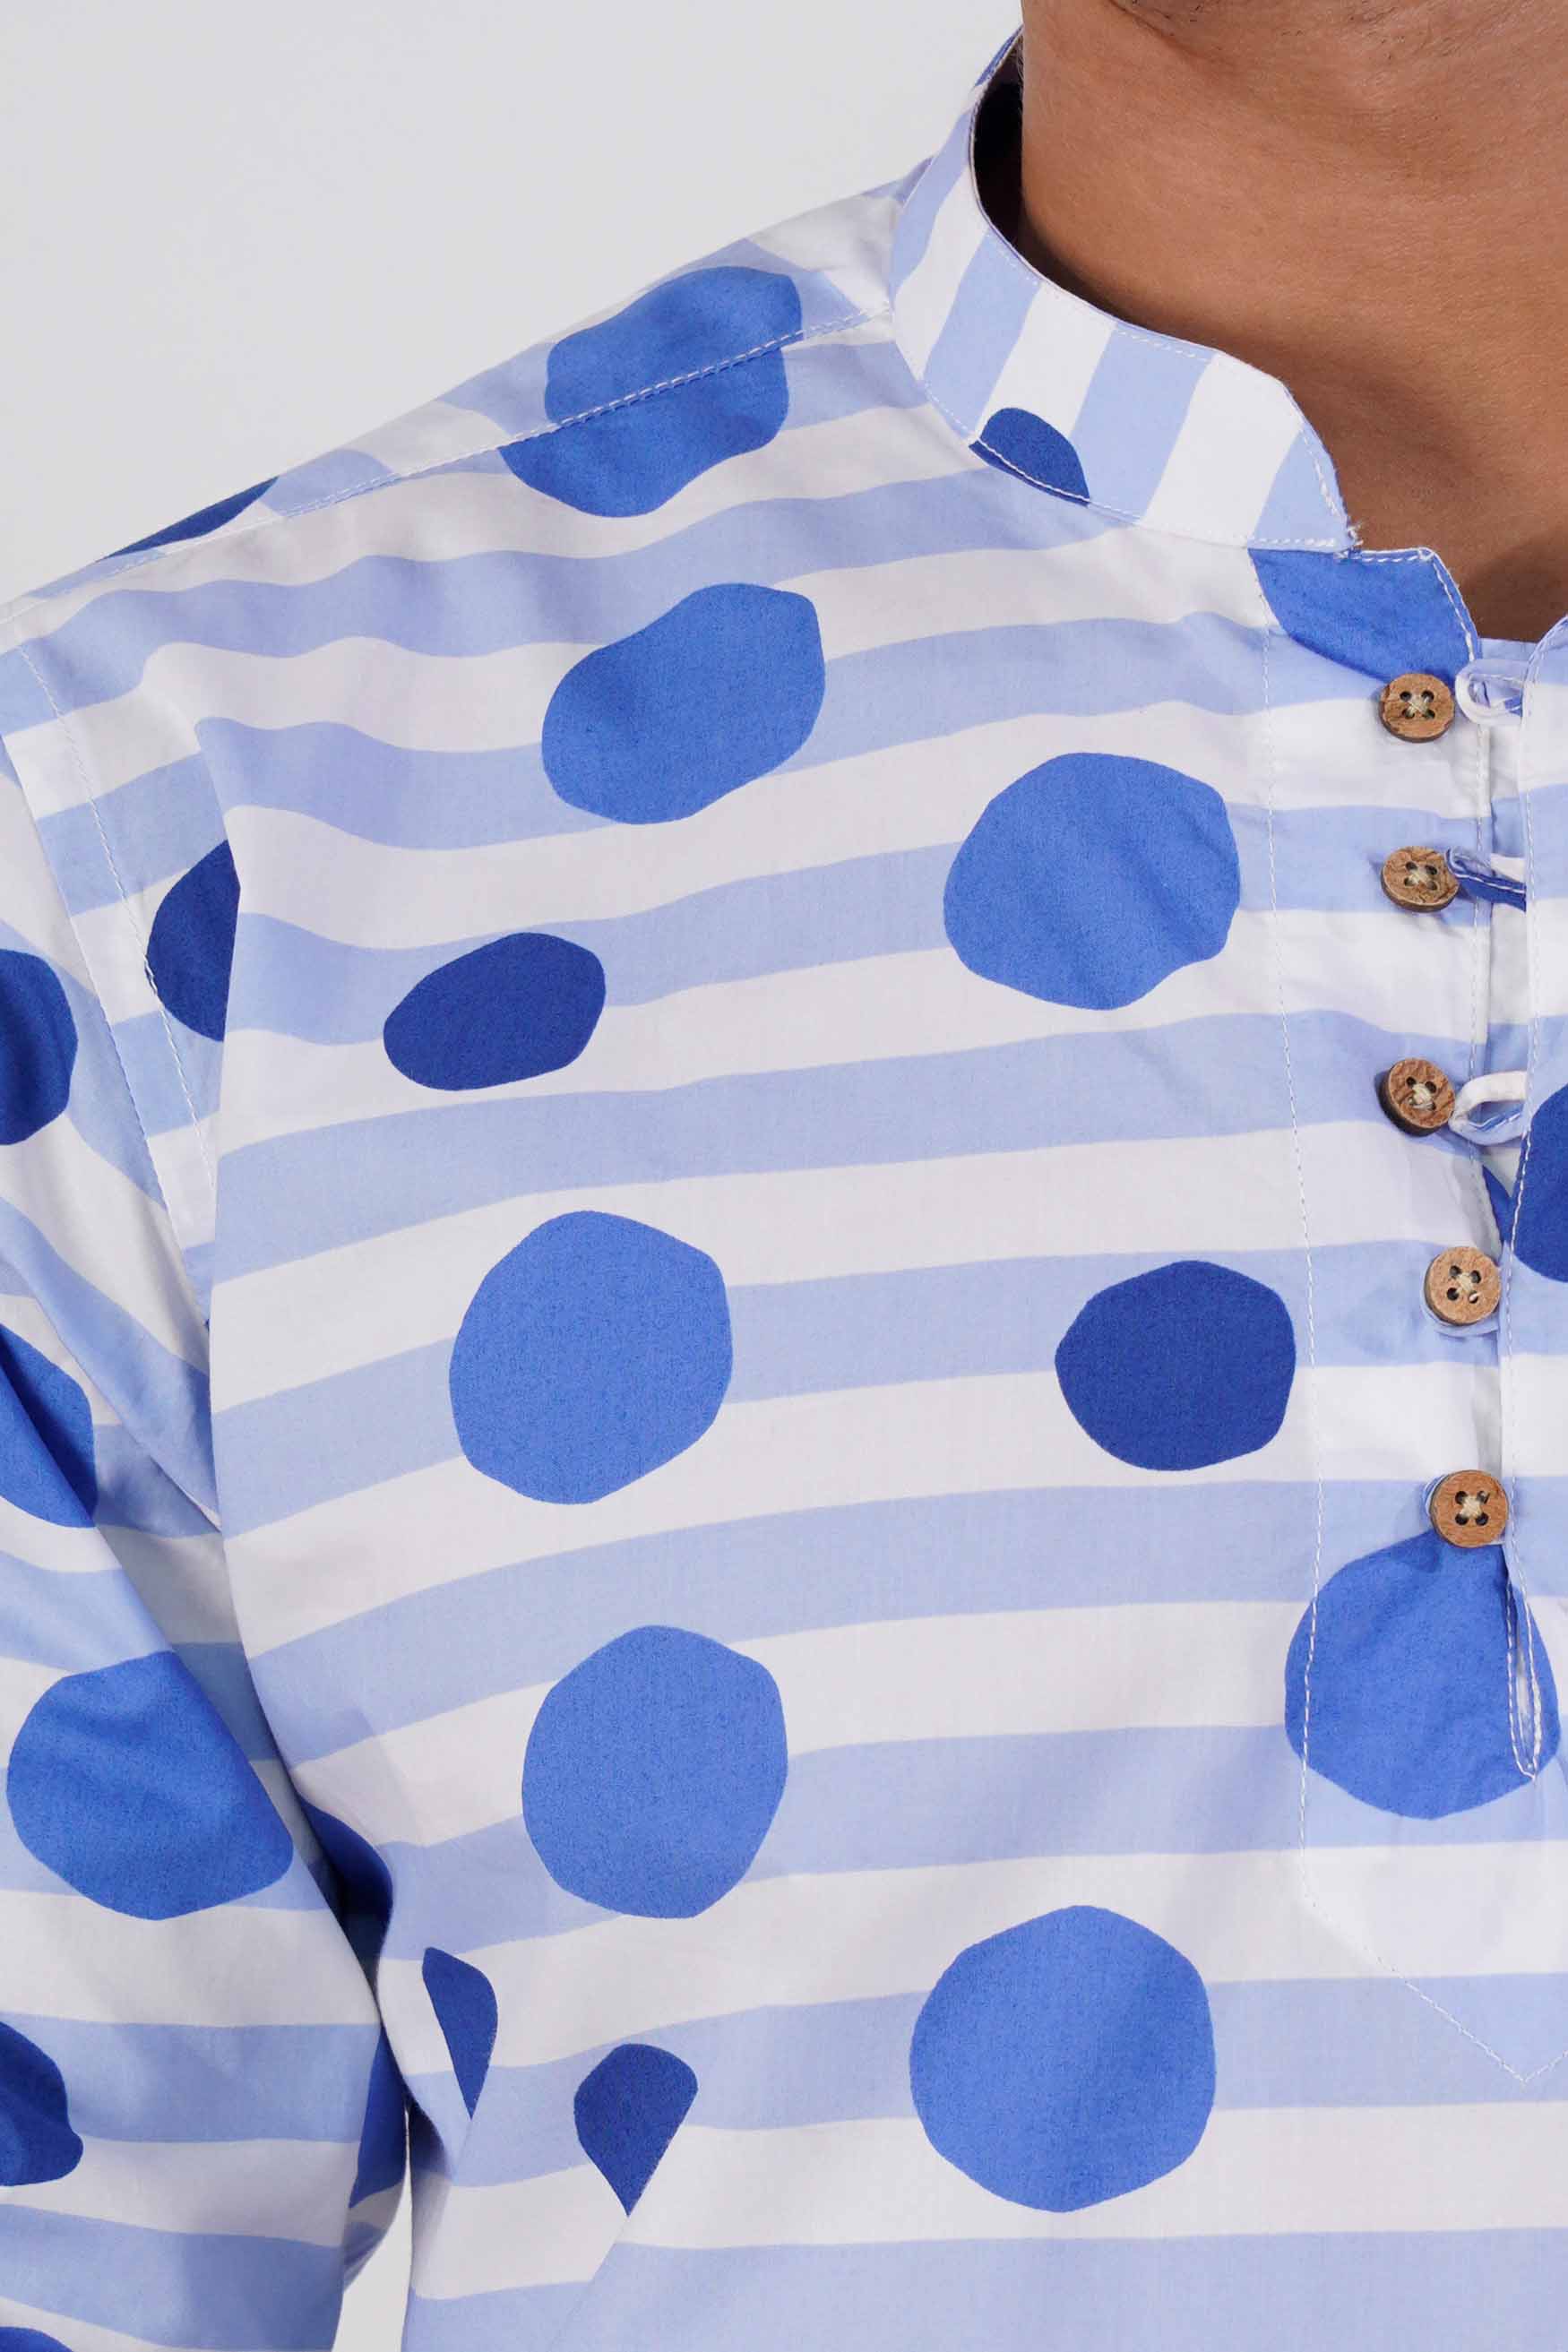 Bright White with Cerulean Blue Striped and Polka Dotted Premium Cotton Kurta Shirt